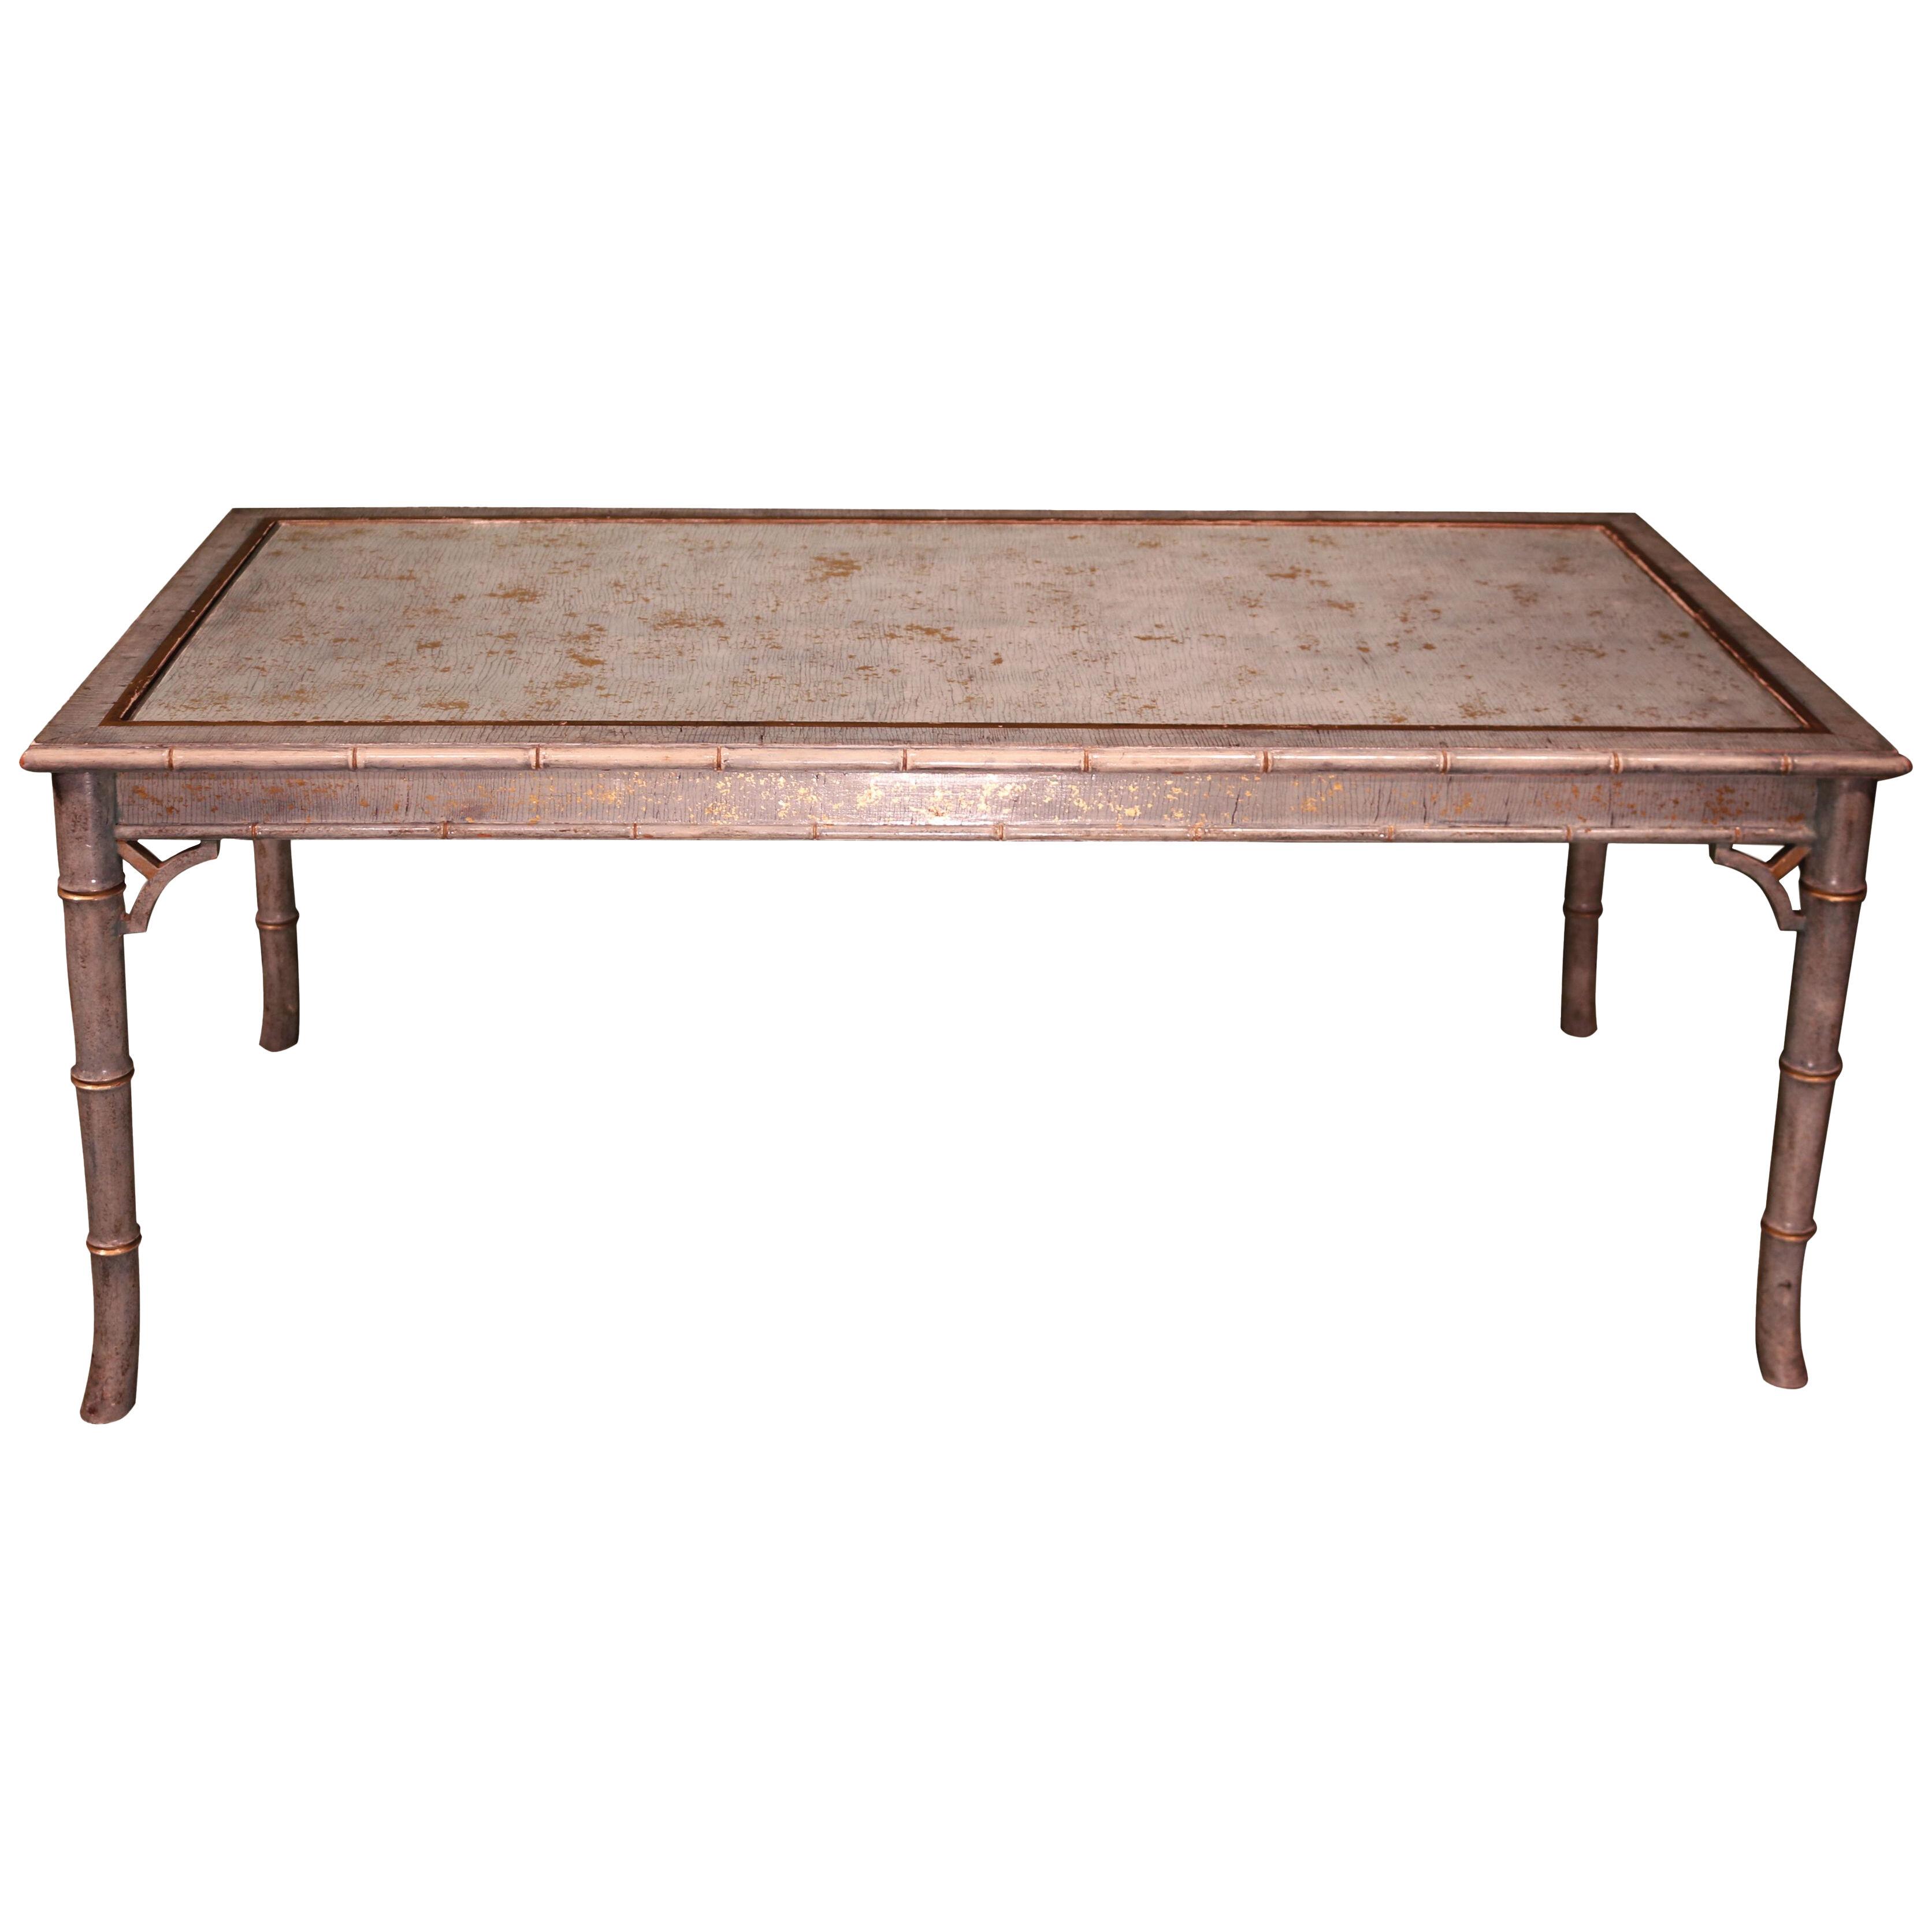 A 20th century rectangular coffee table by Mallet of Bond Street